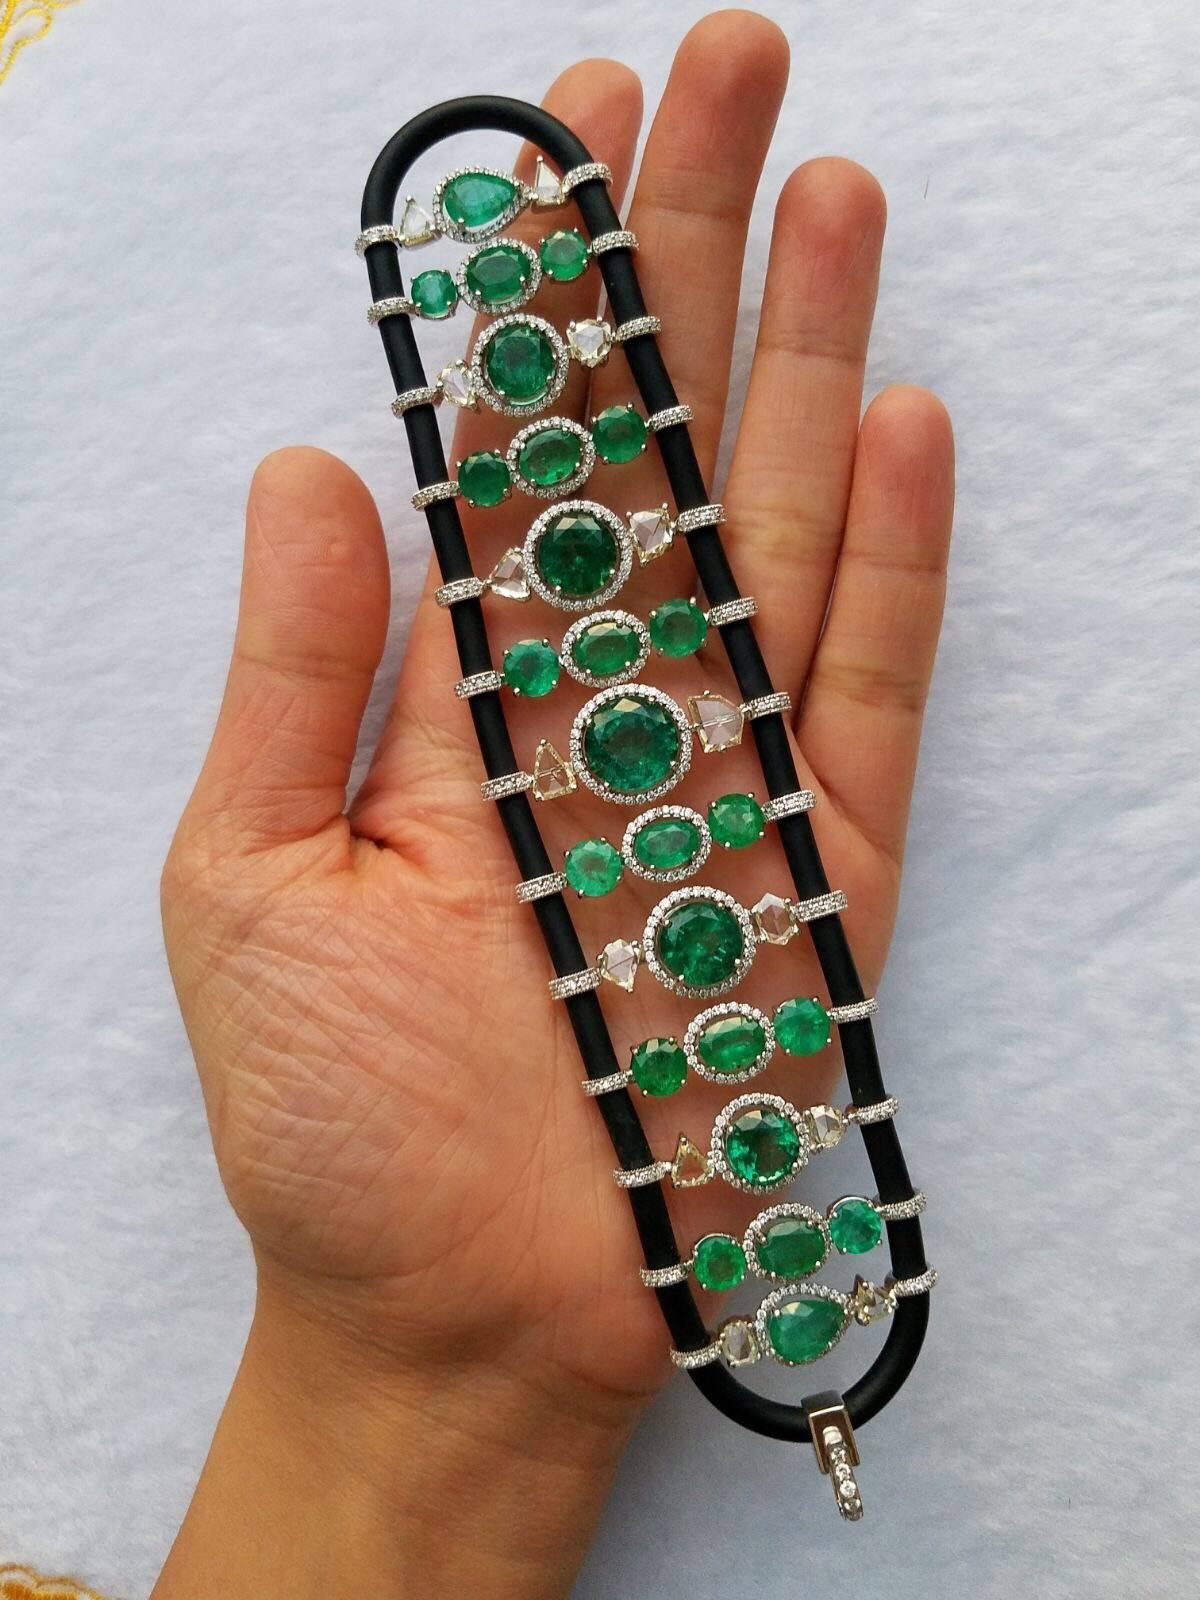 A unique, and contemporary looking rubber bracelet, embelished with Zambian Emerlad and rose cut and fulll cut Diamonds, all set in 18K white gold. 

Stone Details:
Stone: Zambian Emerald
Weight: 41.5 carats
Cut: Pear/Oval/Round

Diamond